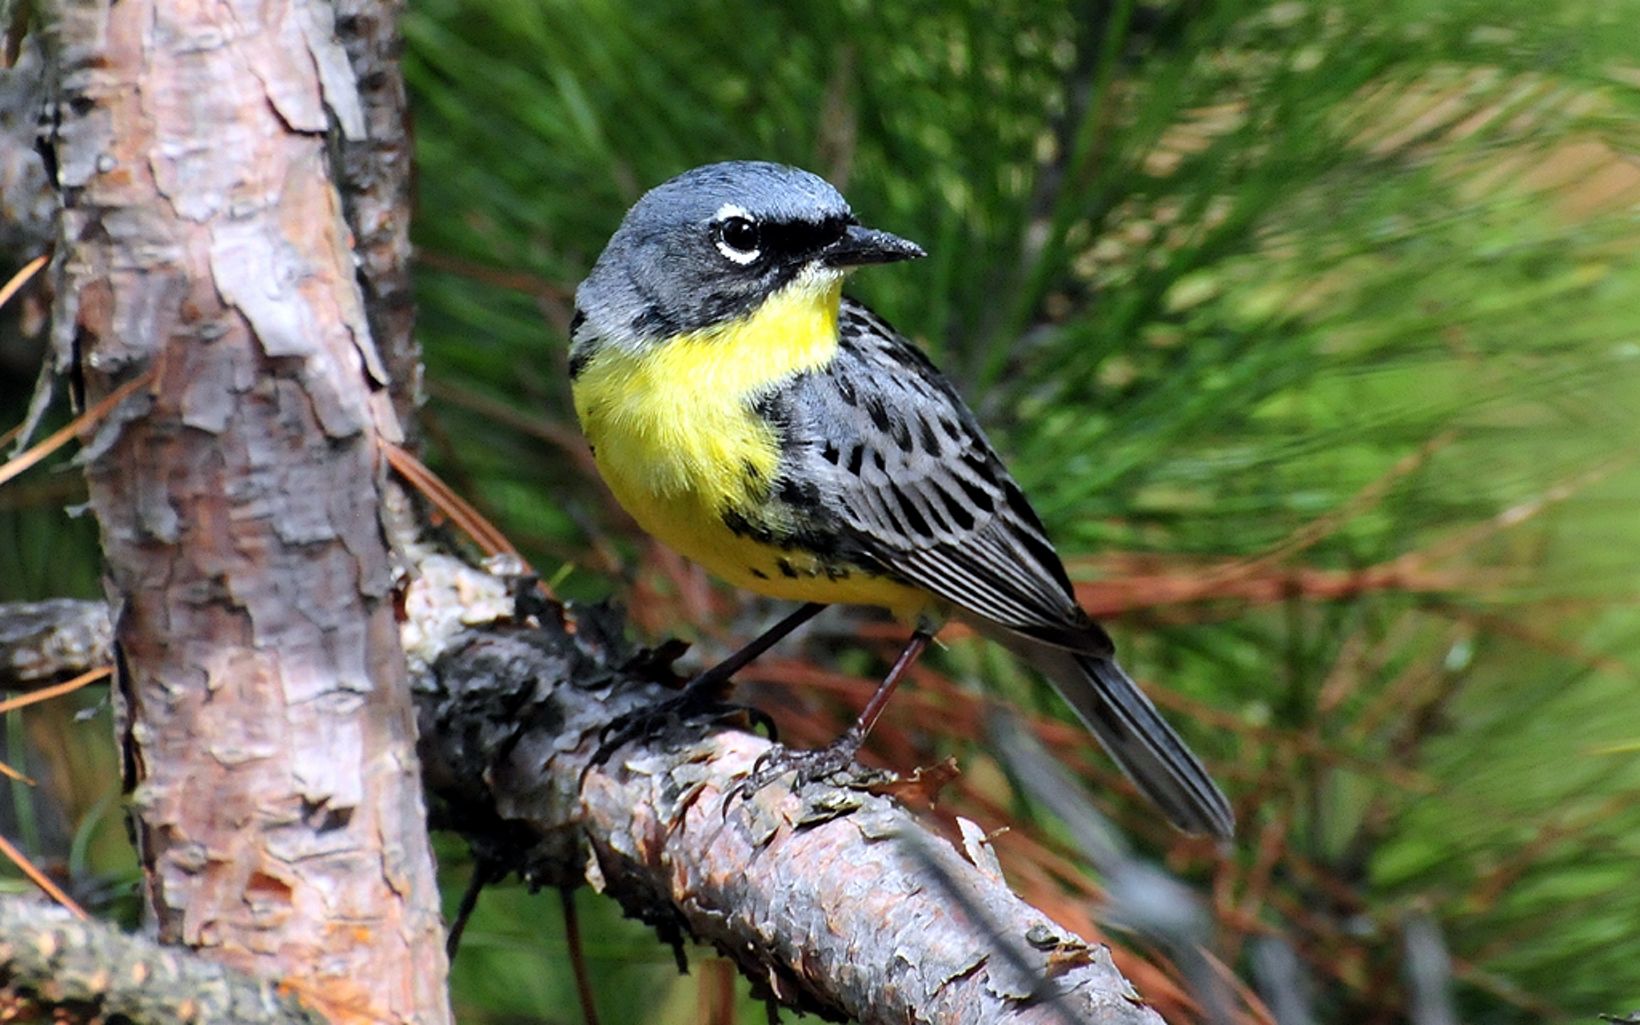 Kirtland's Warbler These migratory songbirds only breed in young jack pine forests in Wisconsin and rely on natural fire events to support their nesting sites.  © Joel Trick